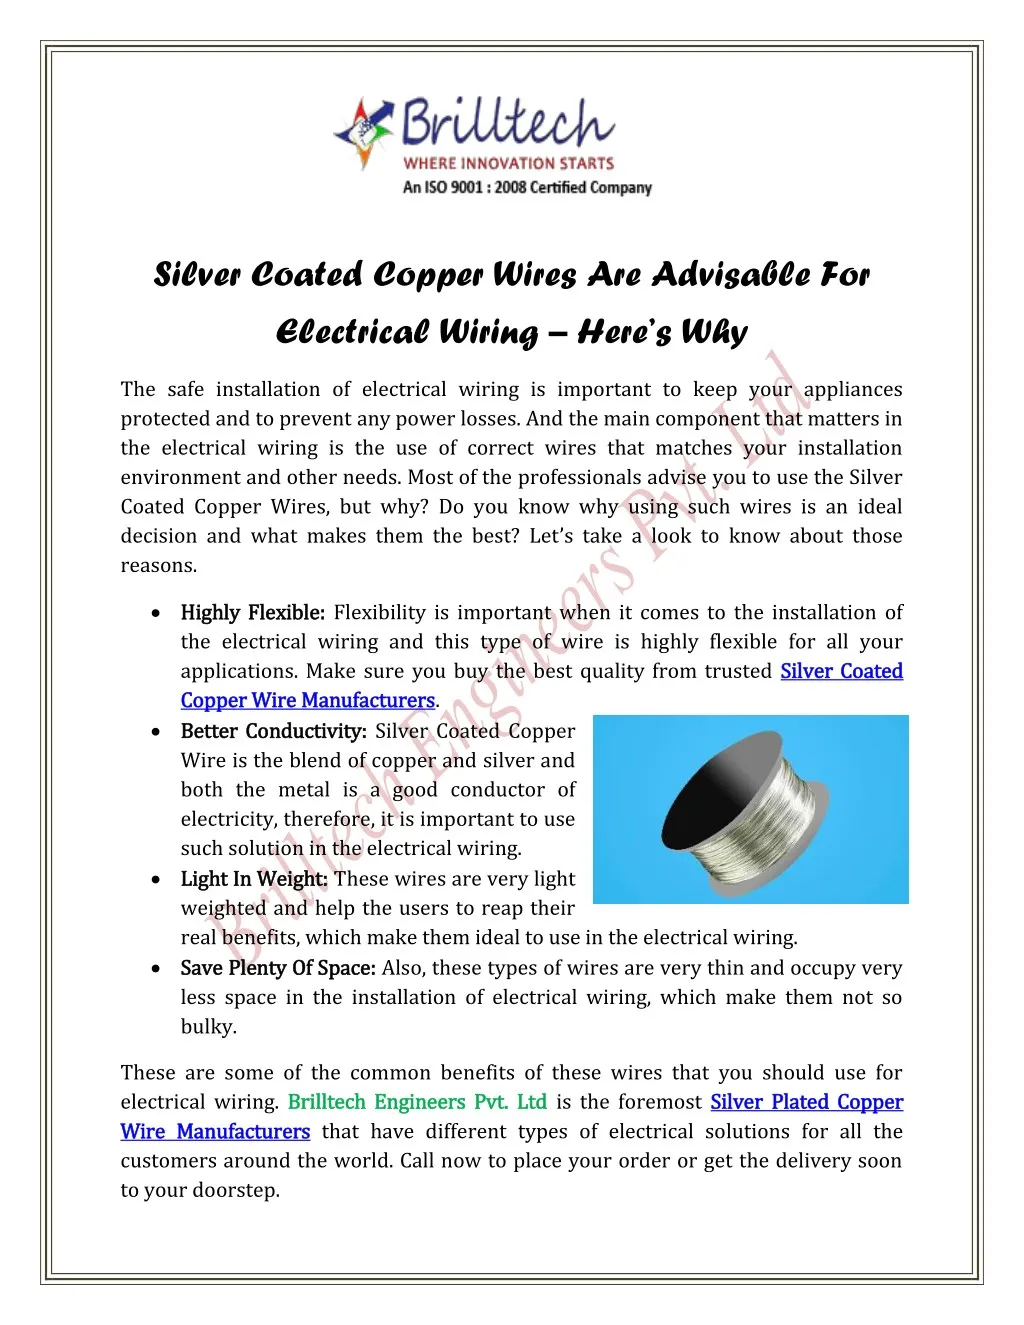 silver coated copper wires are advisable